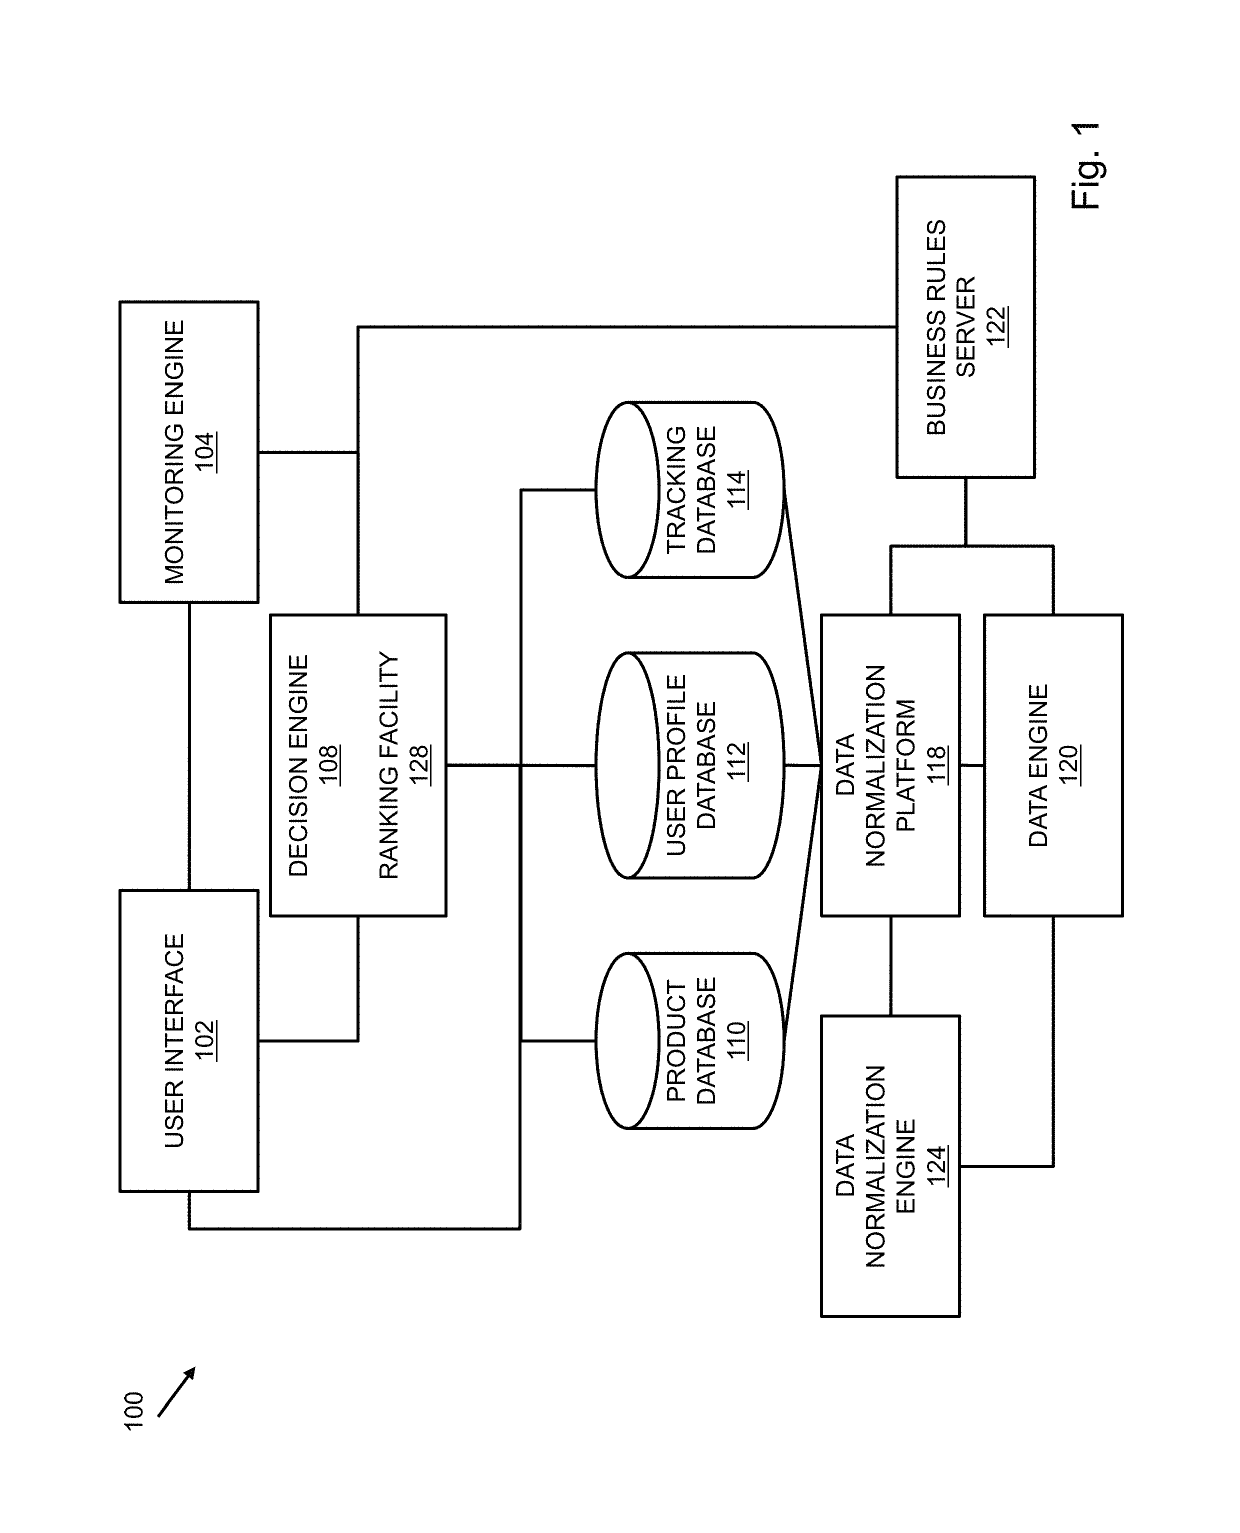 System and method of obtaining merchant sales information for marketing or sales teams